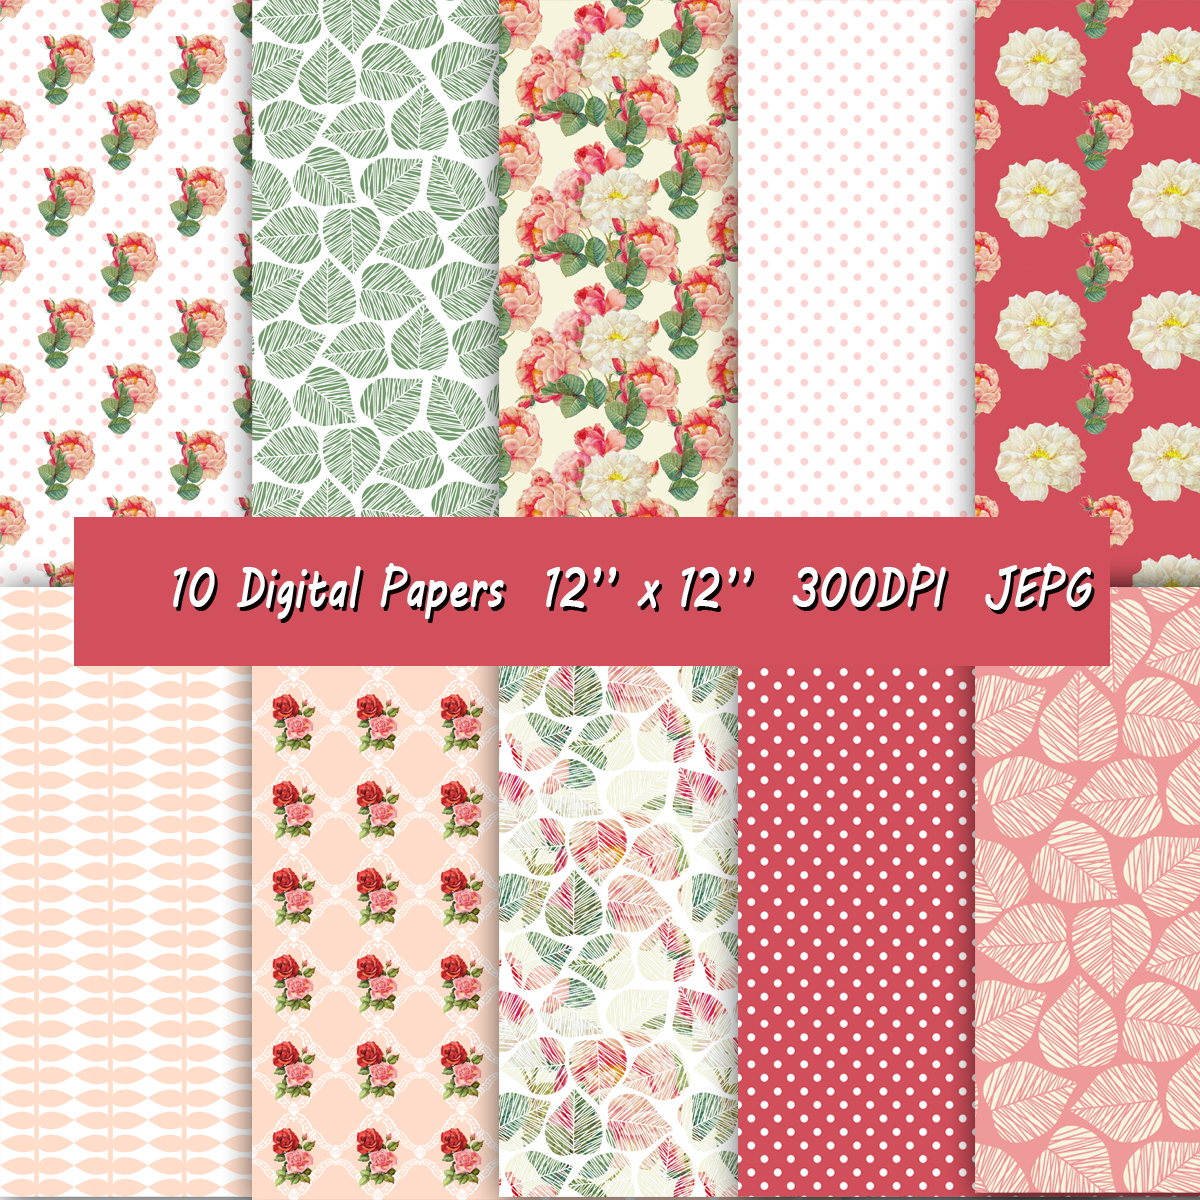 Digital Paper With Flower Pattern, Roses Background And Polkadots Print In A Beautiful Combination Of Coral, Pink And White.